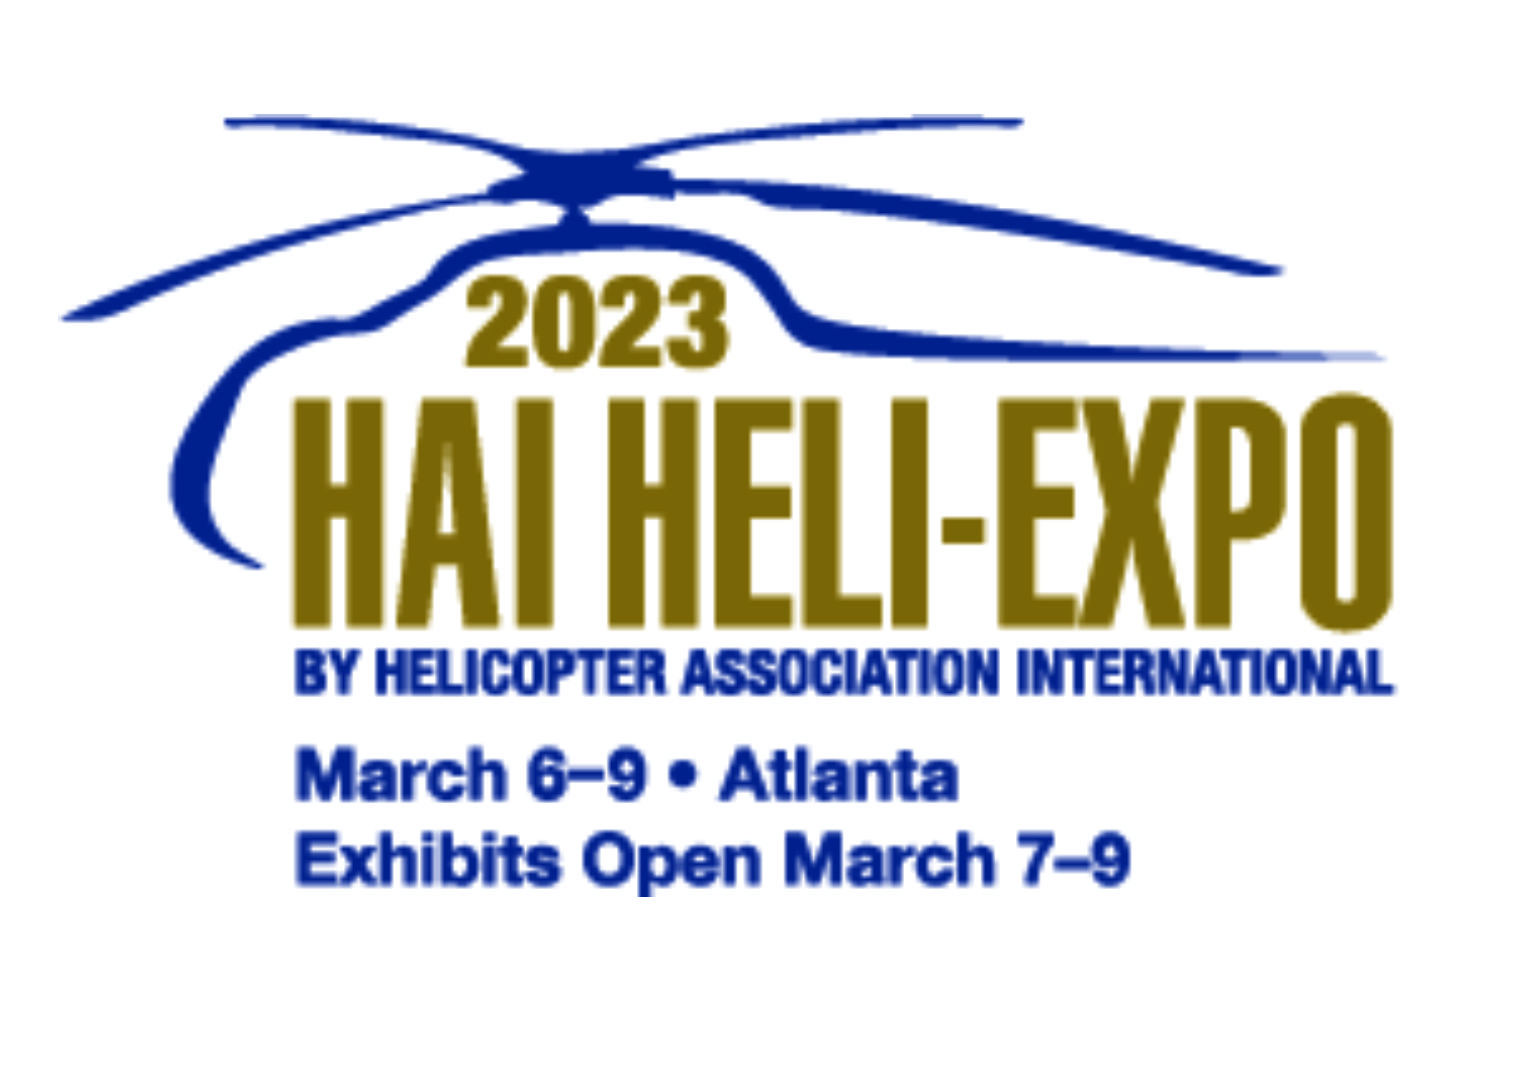 ARESIA is present at HAI HELI-EXPO